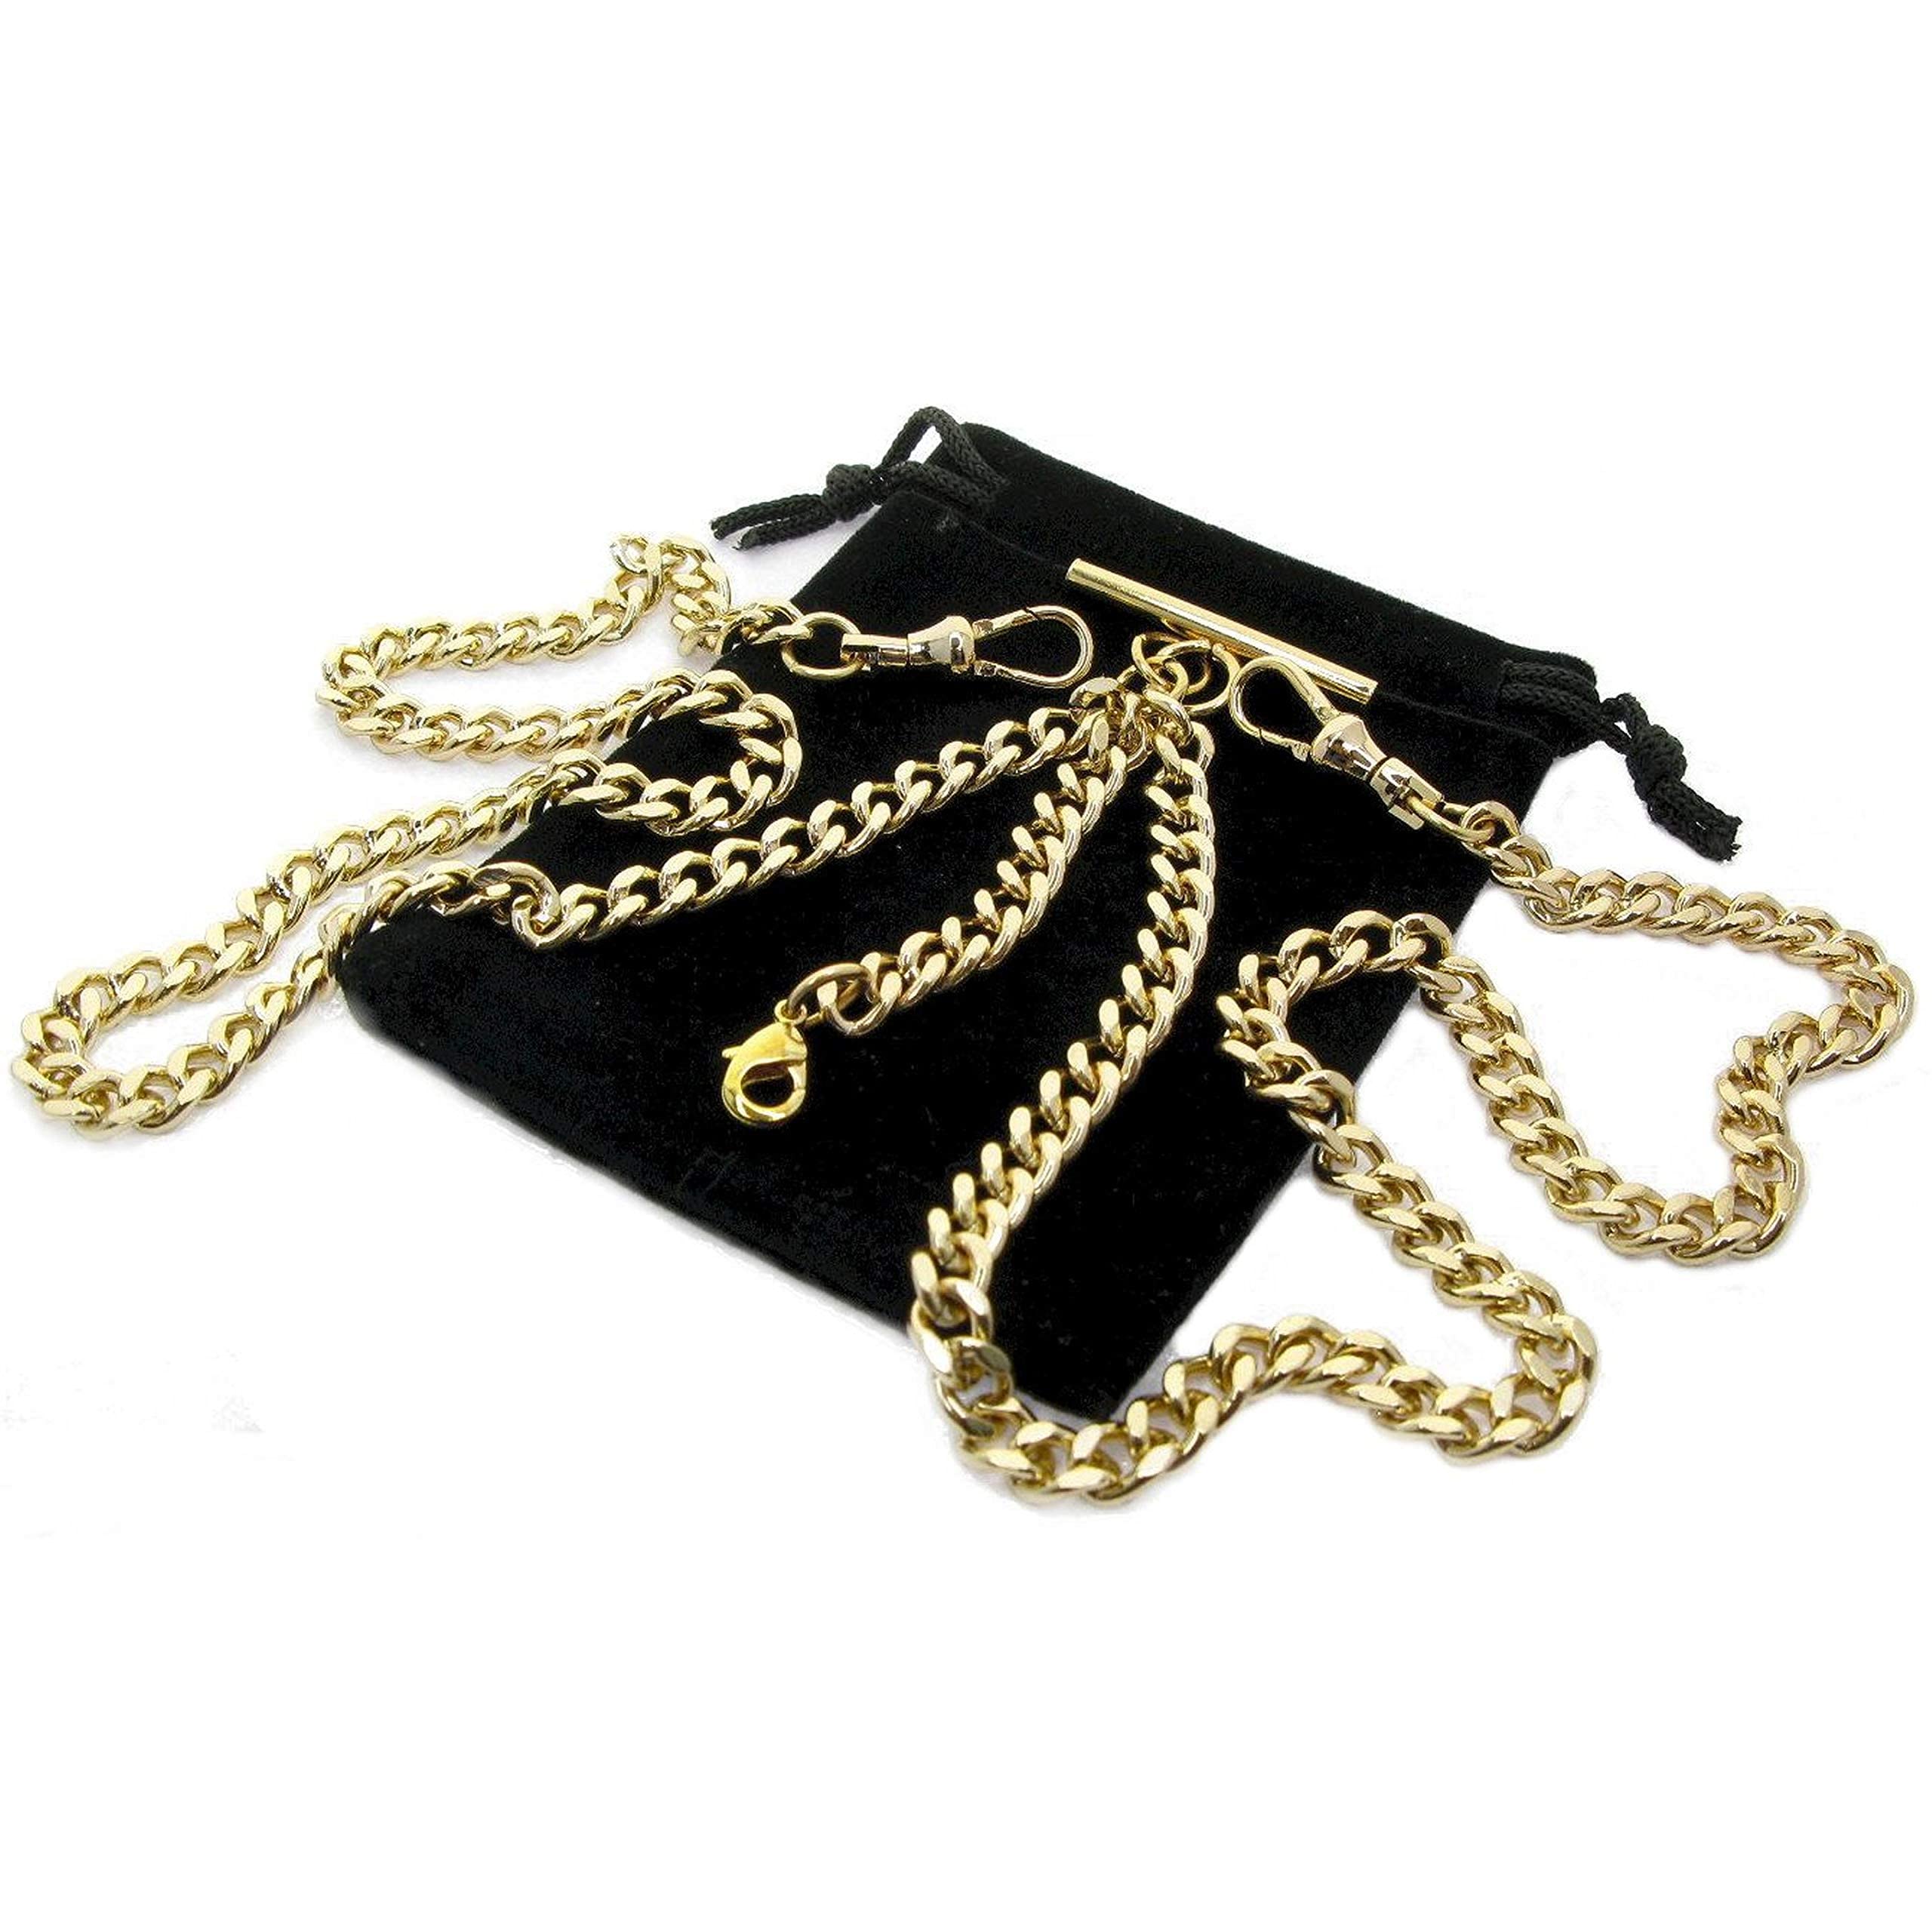 Double Albert Chain Gold Color Pocket Watch Chain for Men with T Bar Swivel Clasps and Fob Drops with Small Lobster Clasp AC01